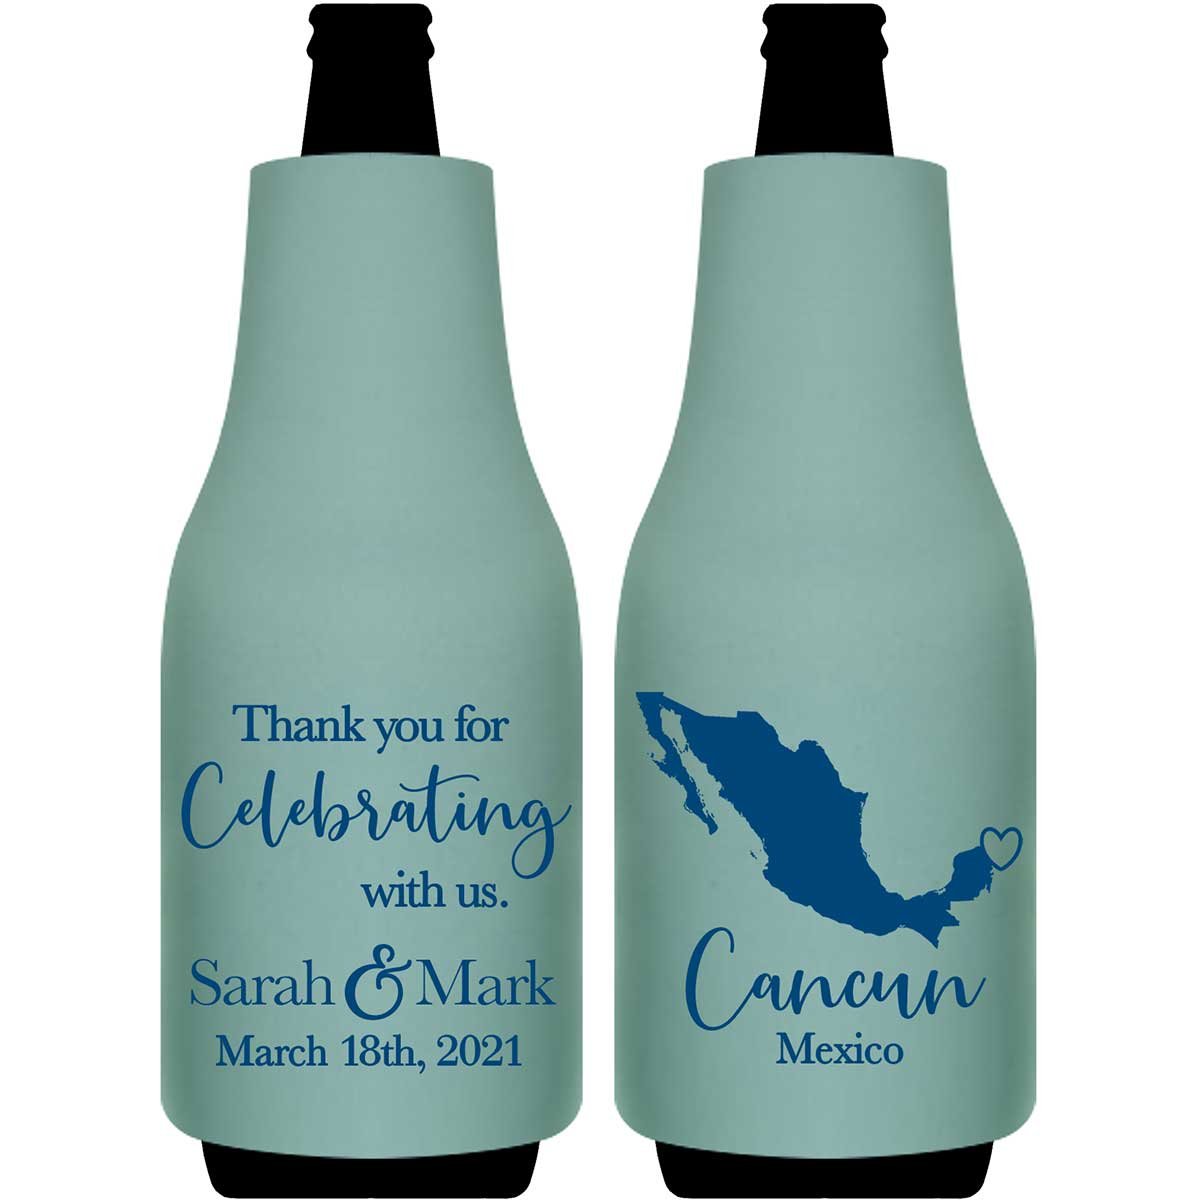 Thank You For Celebrating With Us 1C Any Map Foldable Bottle Sleeve Koozies Wedding Gifts for Guests